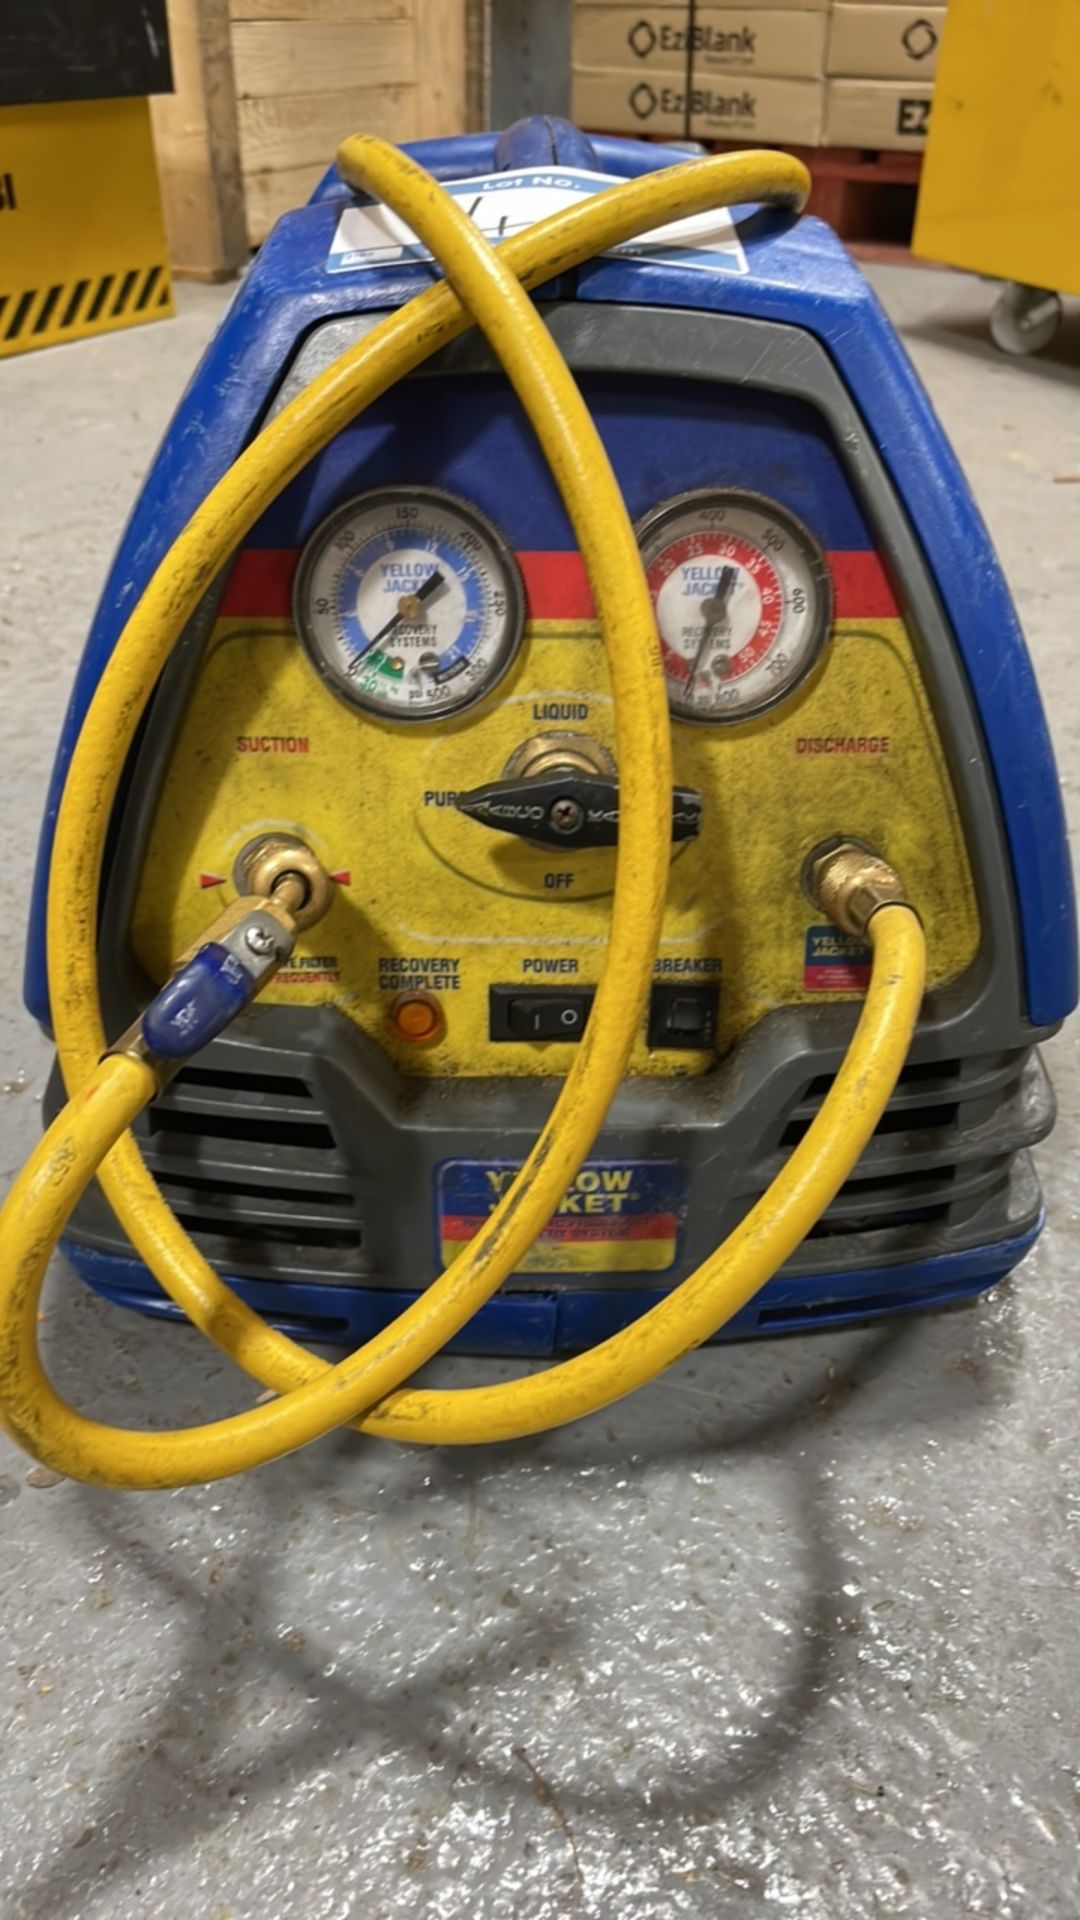 Yellow Jacket RecoverXLT Refrigerant Recovery Unit - Image 8 of 8